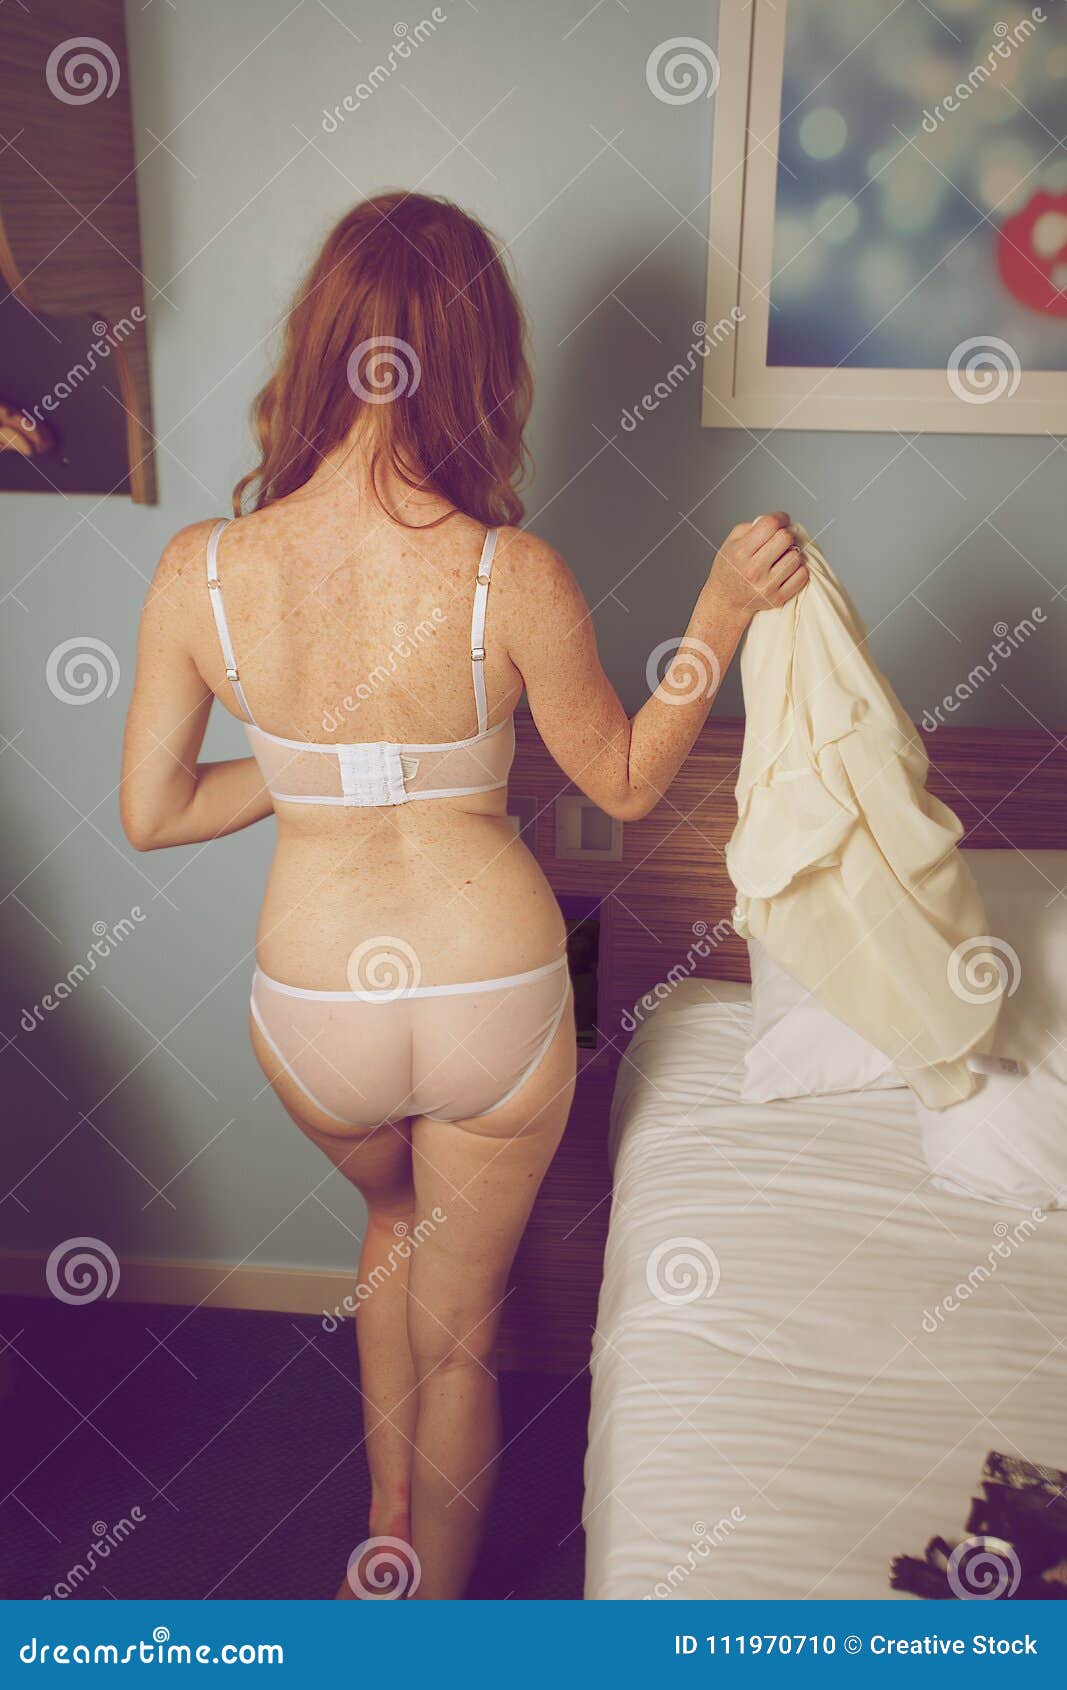 Woman gets undressed stock photo